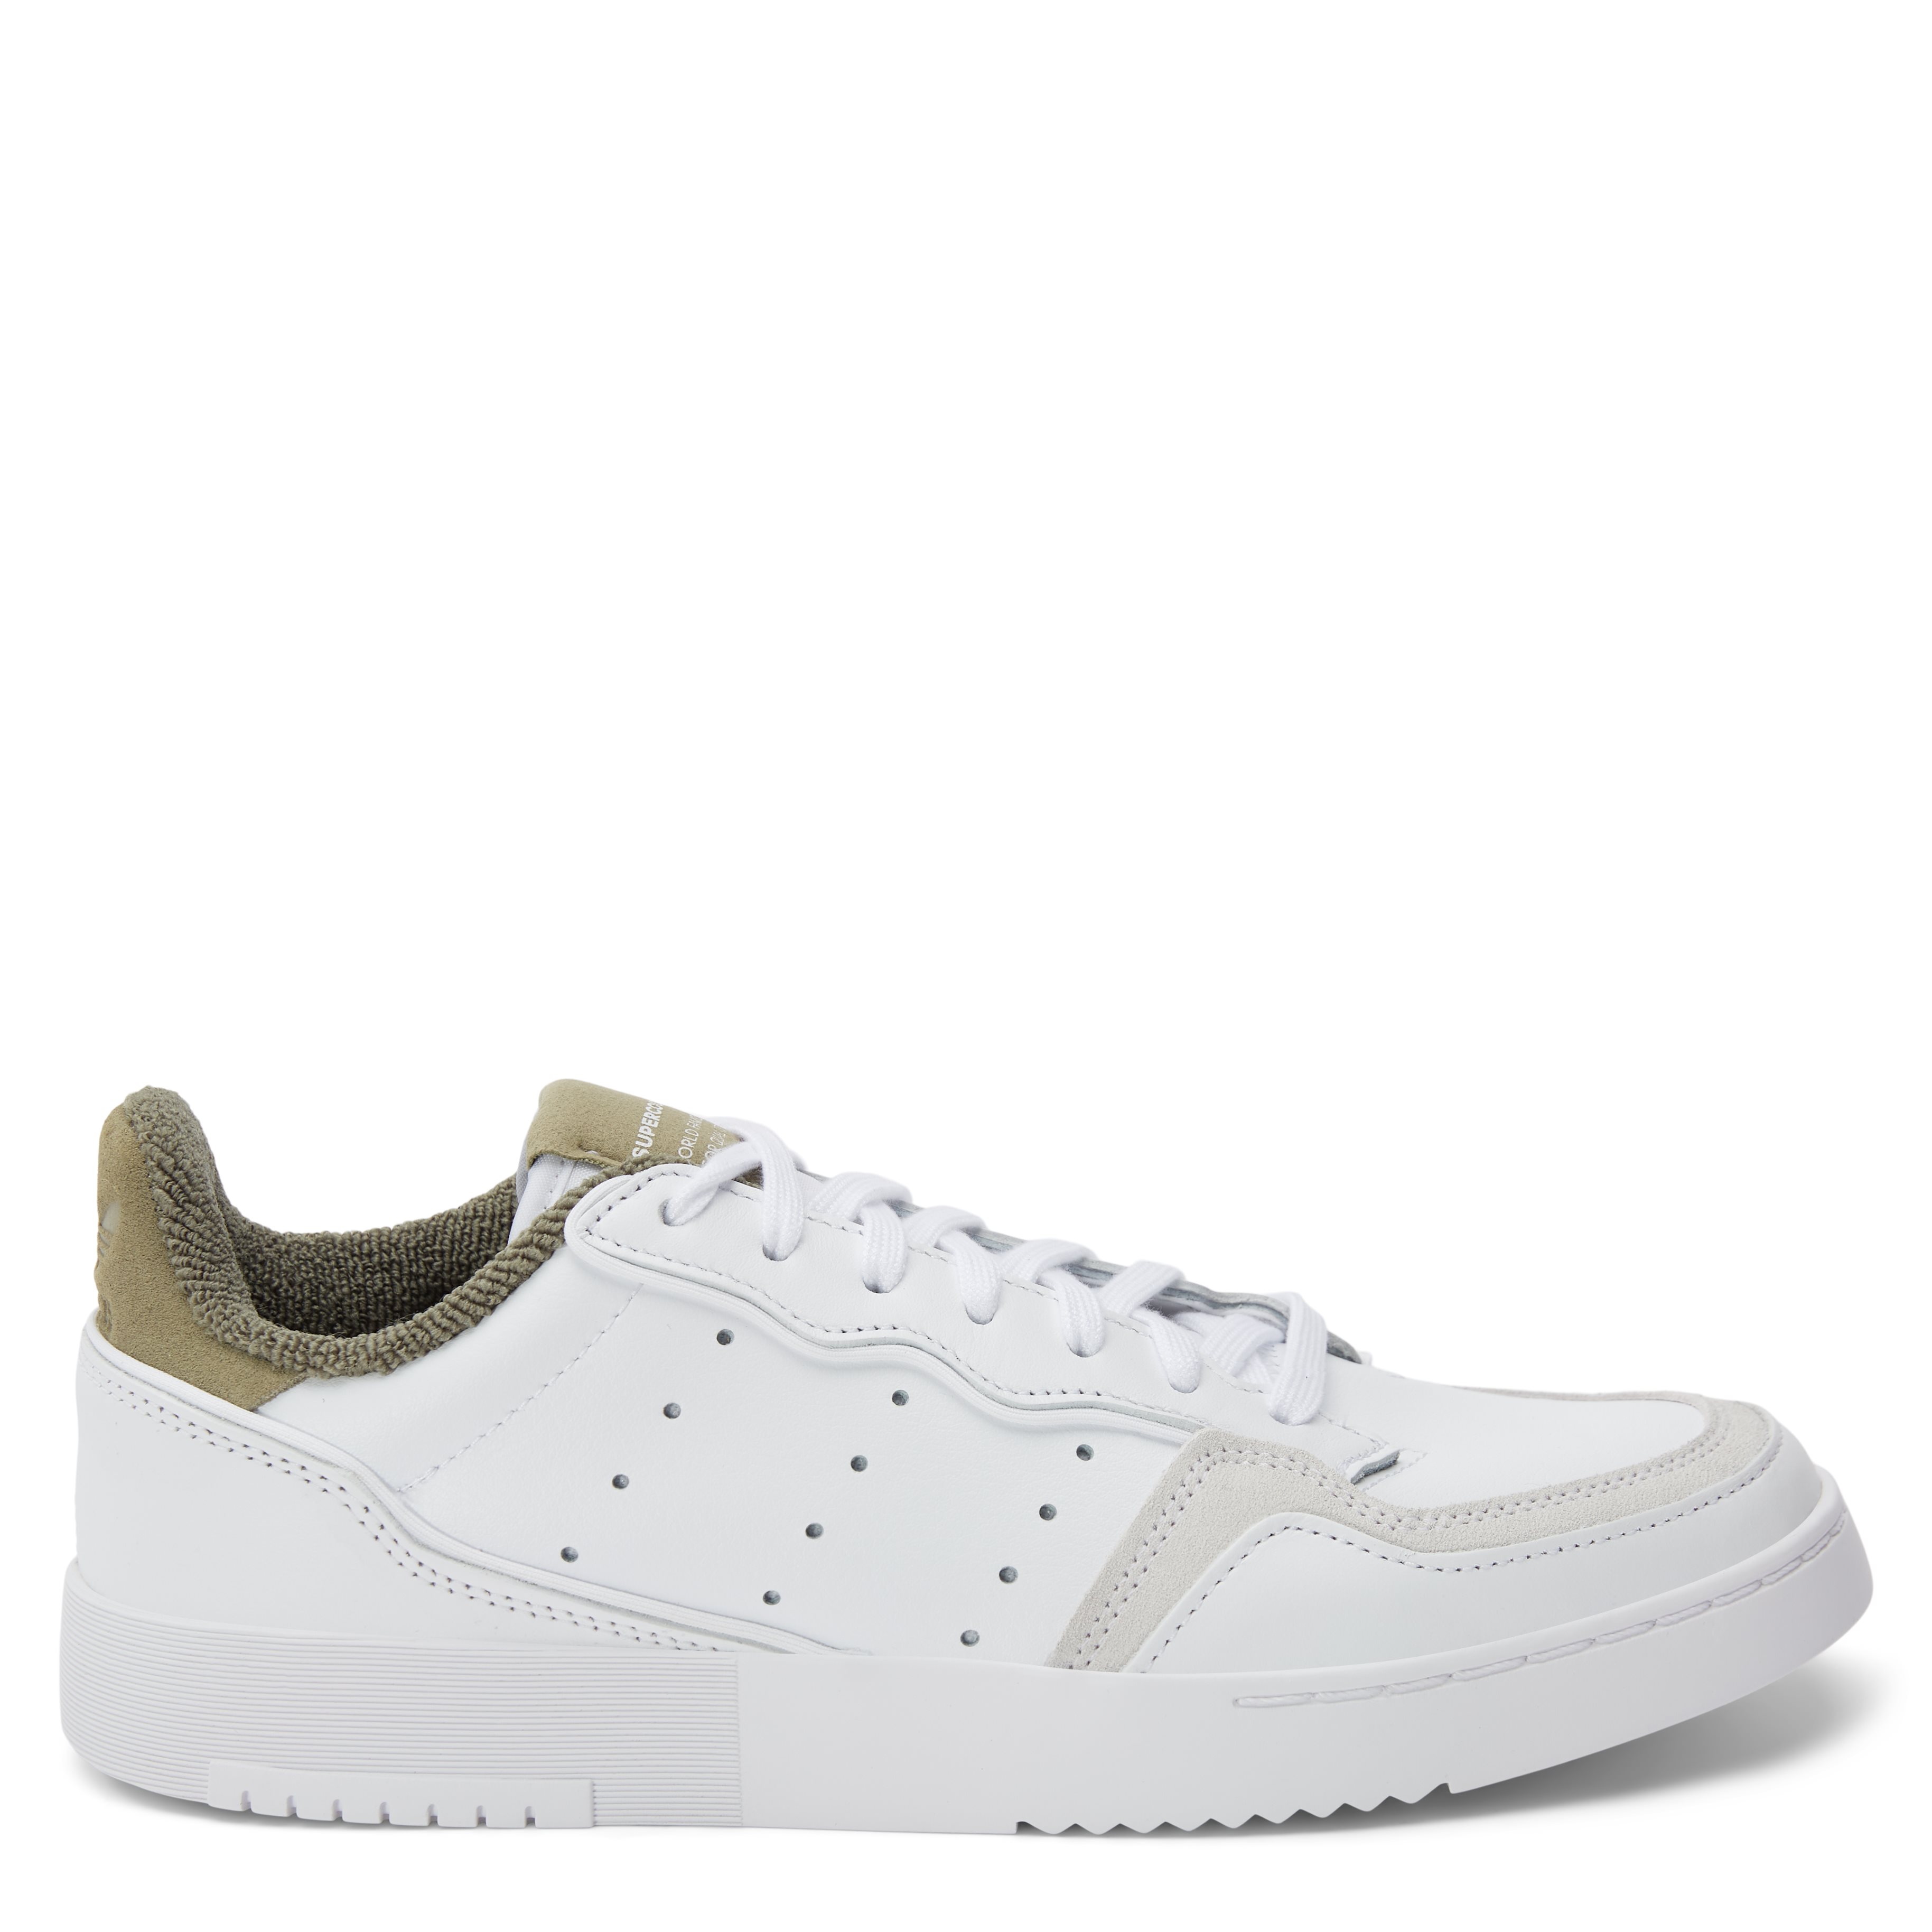 Supercourt Sneakers - Shoes - Regular fit - White